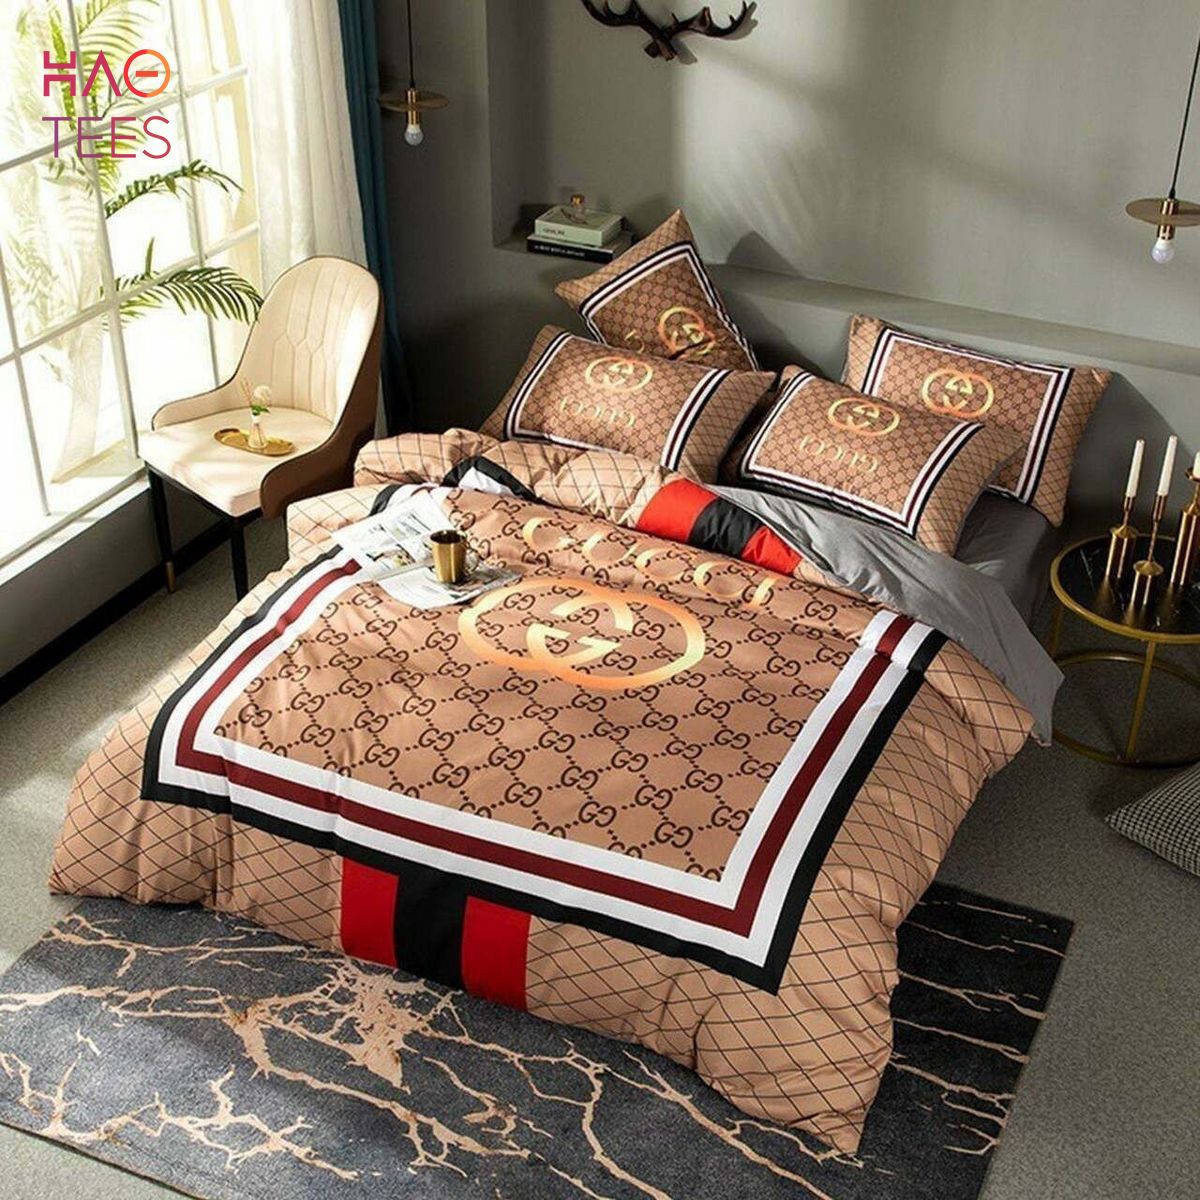 GC Brown Mix Color Luxury Brand Inspired 3D Personalized Customized Bedding Sets